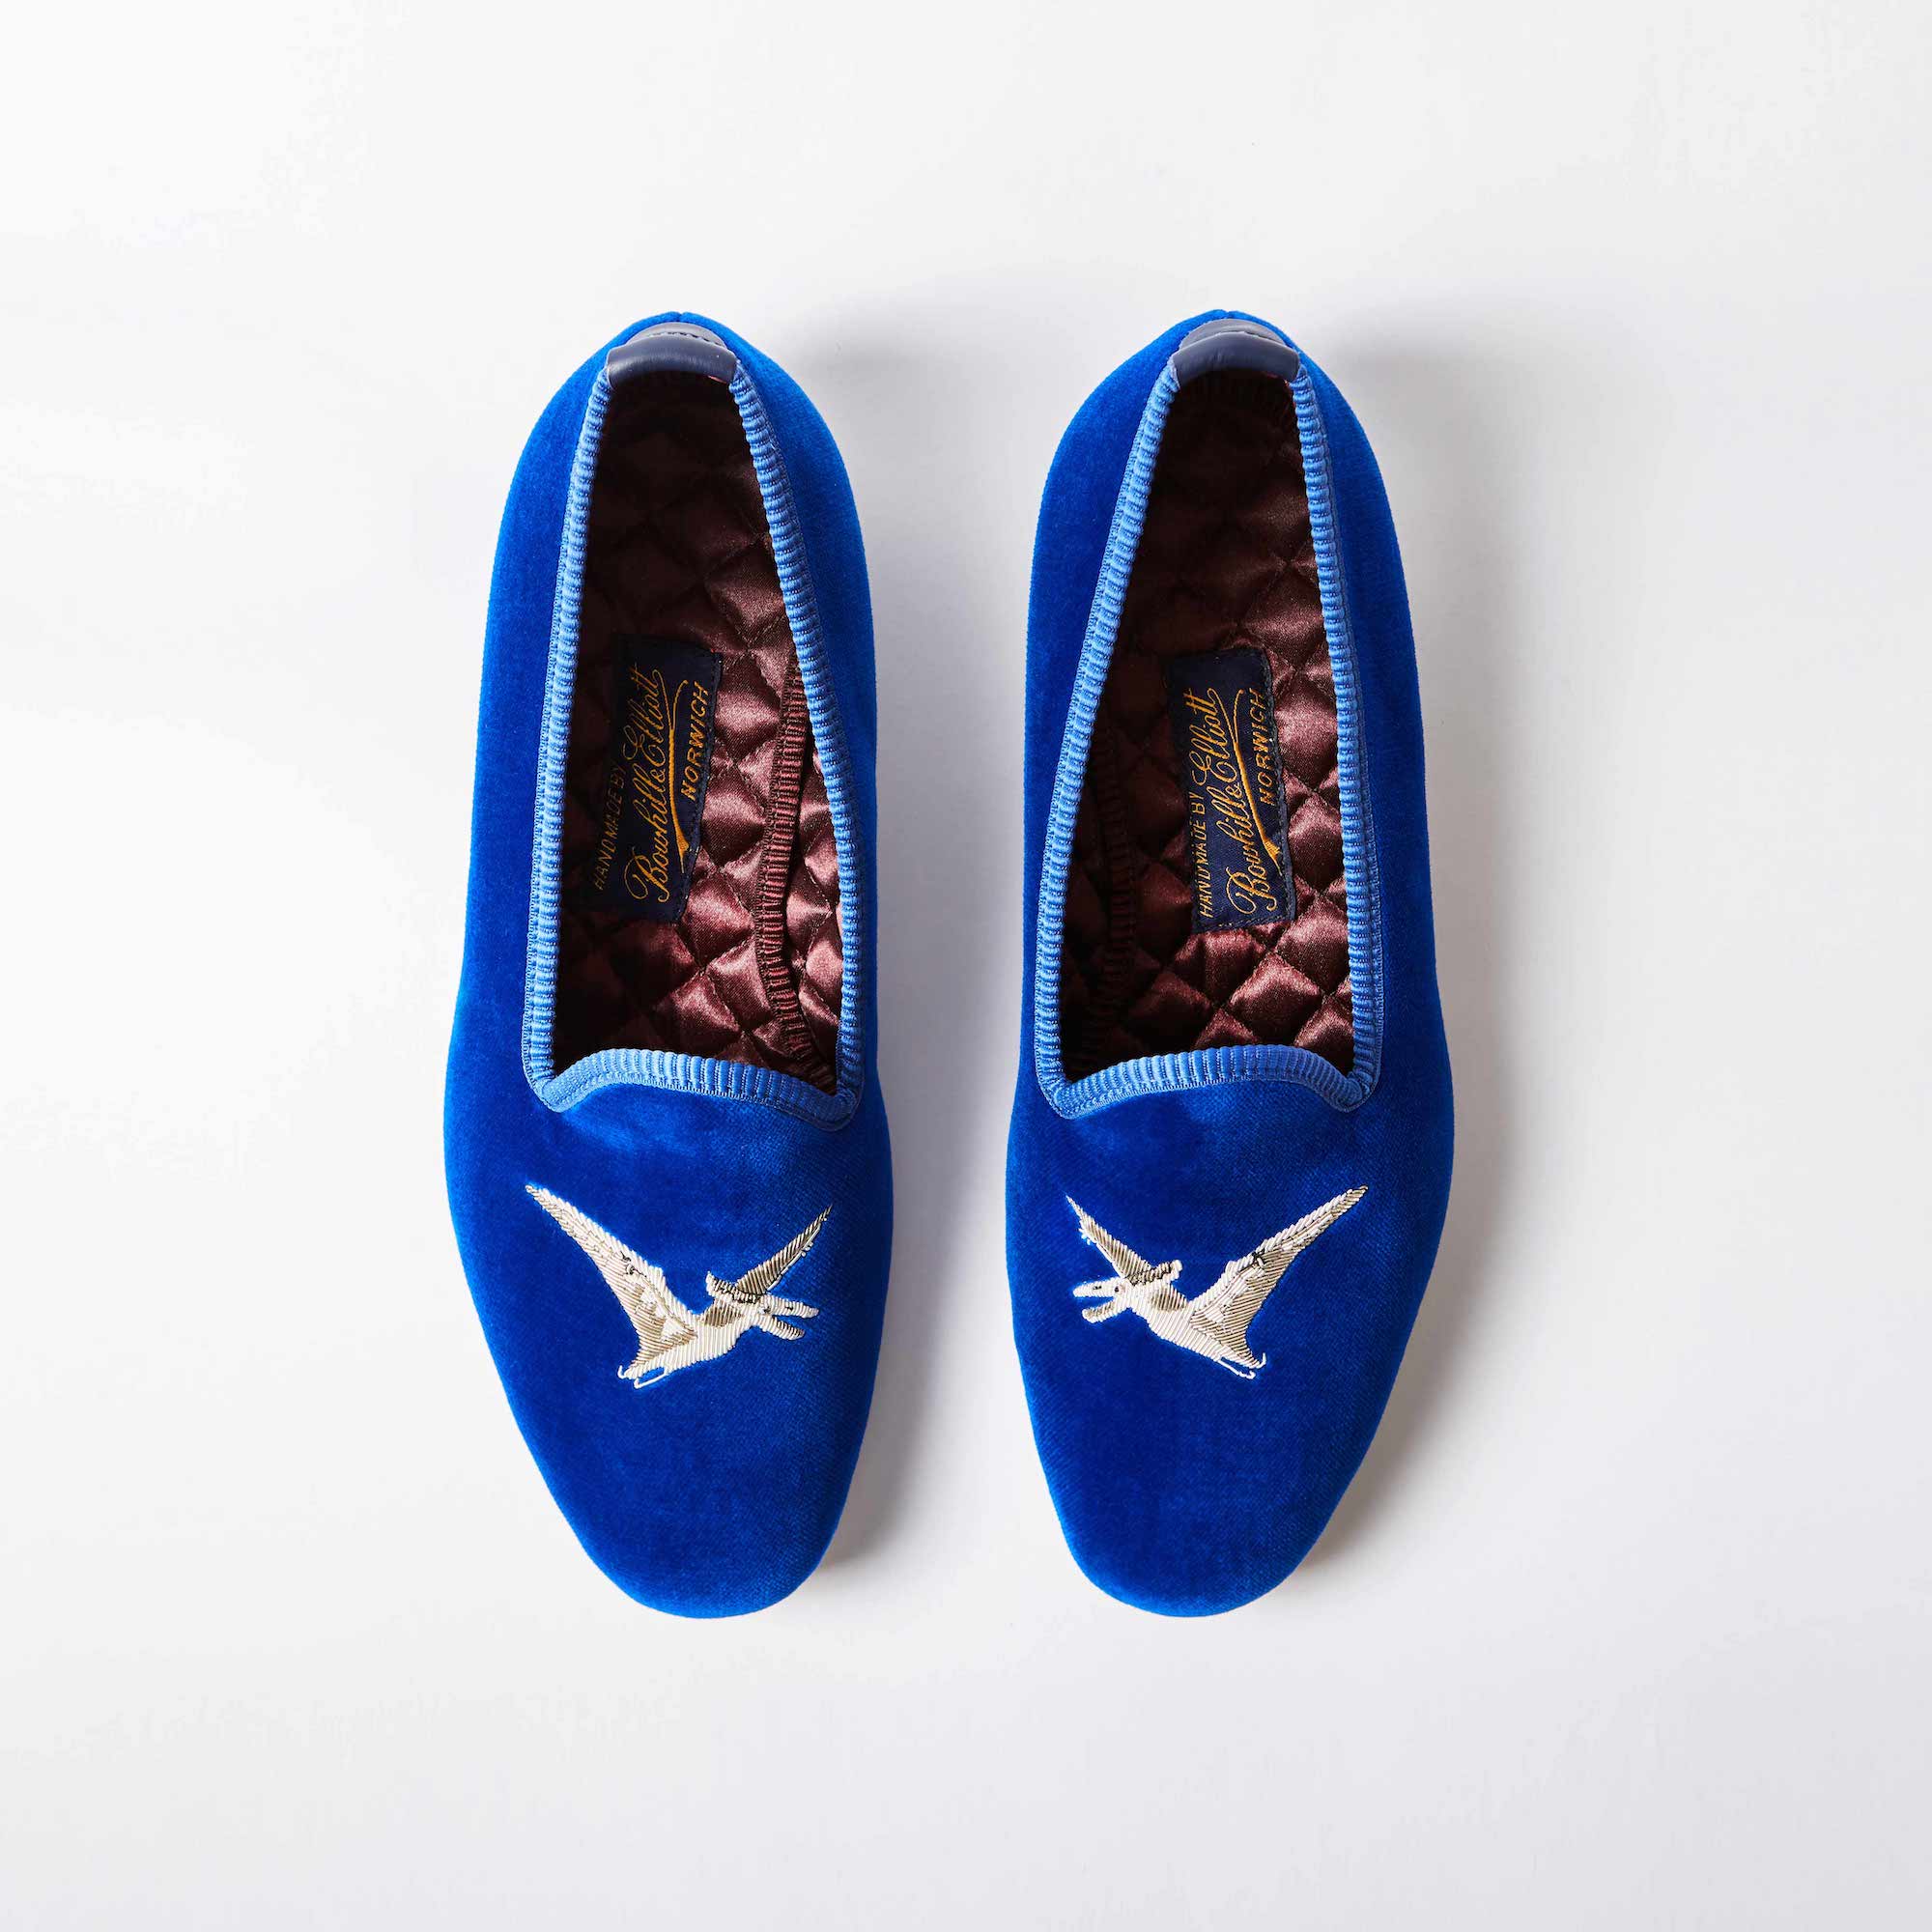 Royal Blue Velvet Venetian with Embroidered Pterodactyl